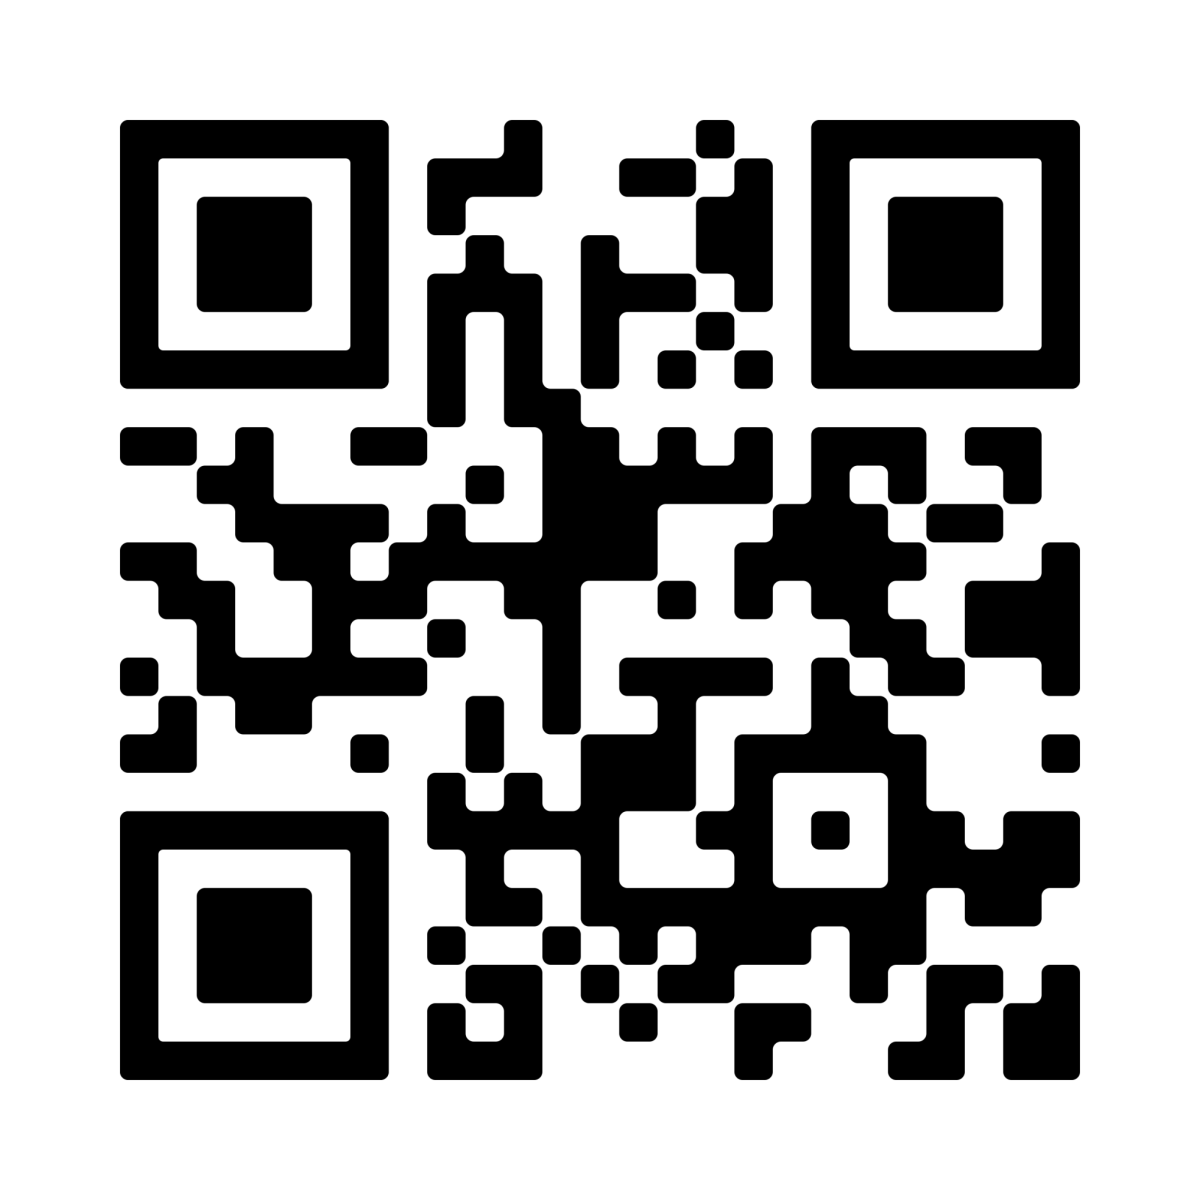 How+many+items+in+your+daily+life+contain+plastic%3F+Observe+and+share+your+results+with+us+with+the+QR+code+above%3A